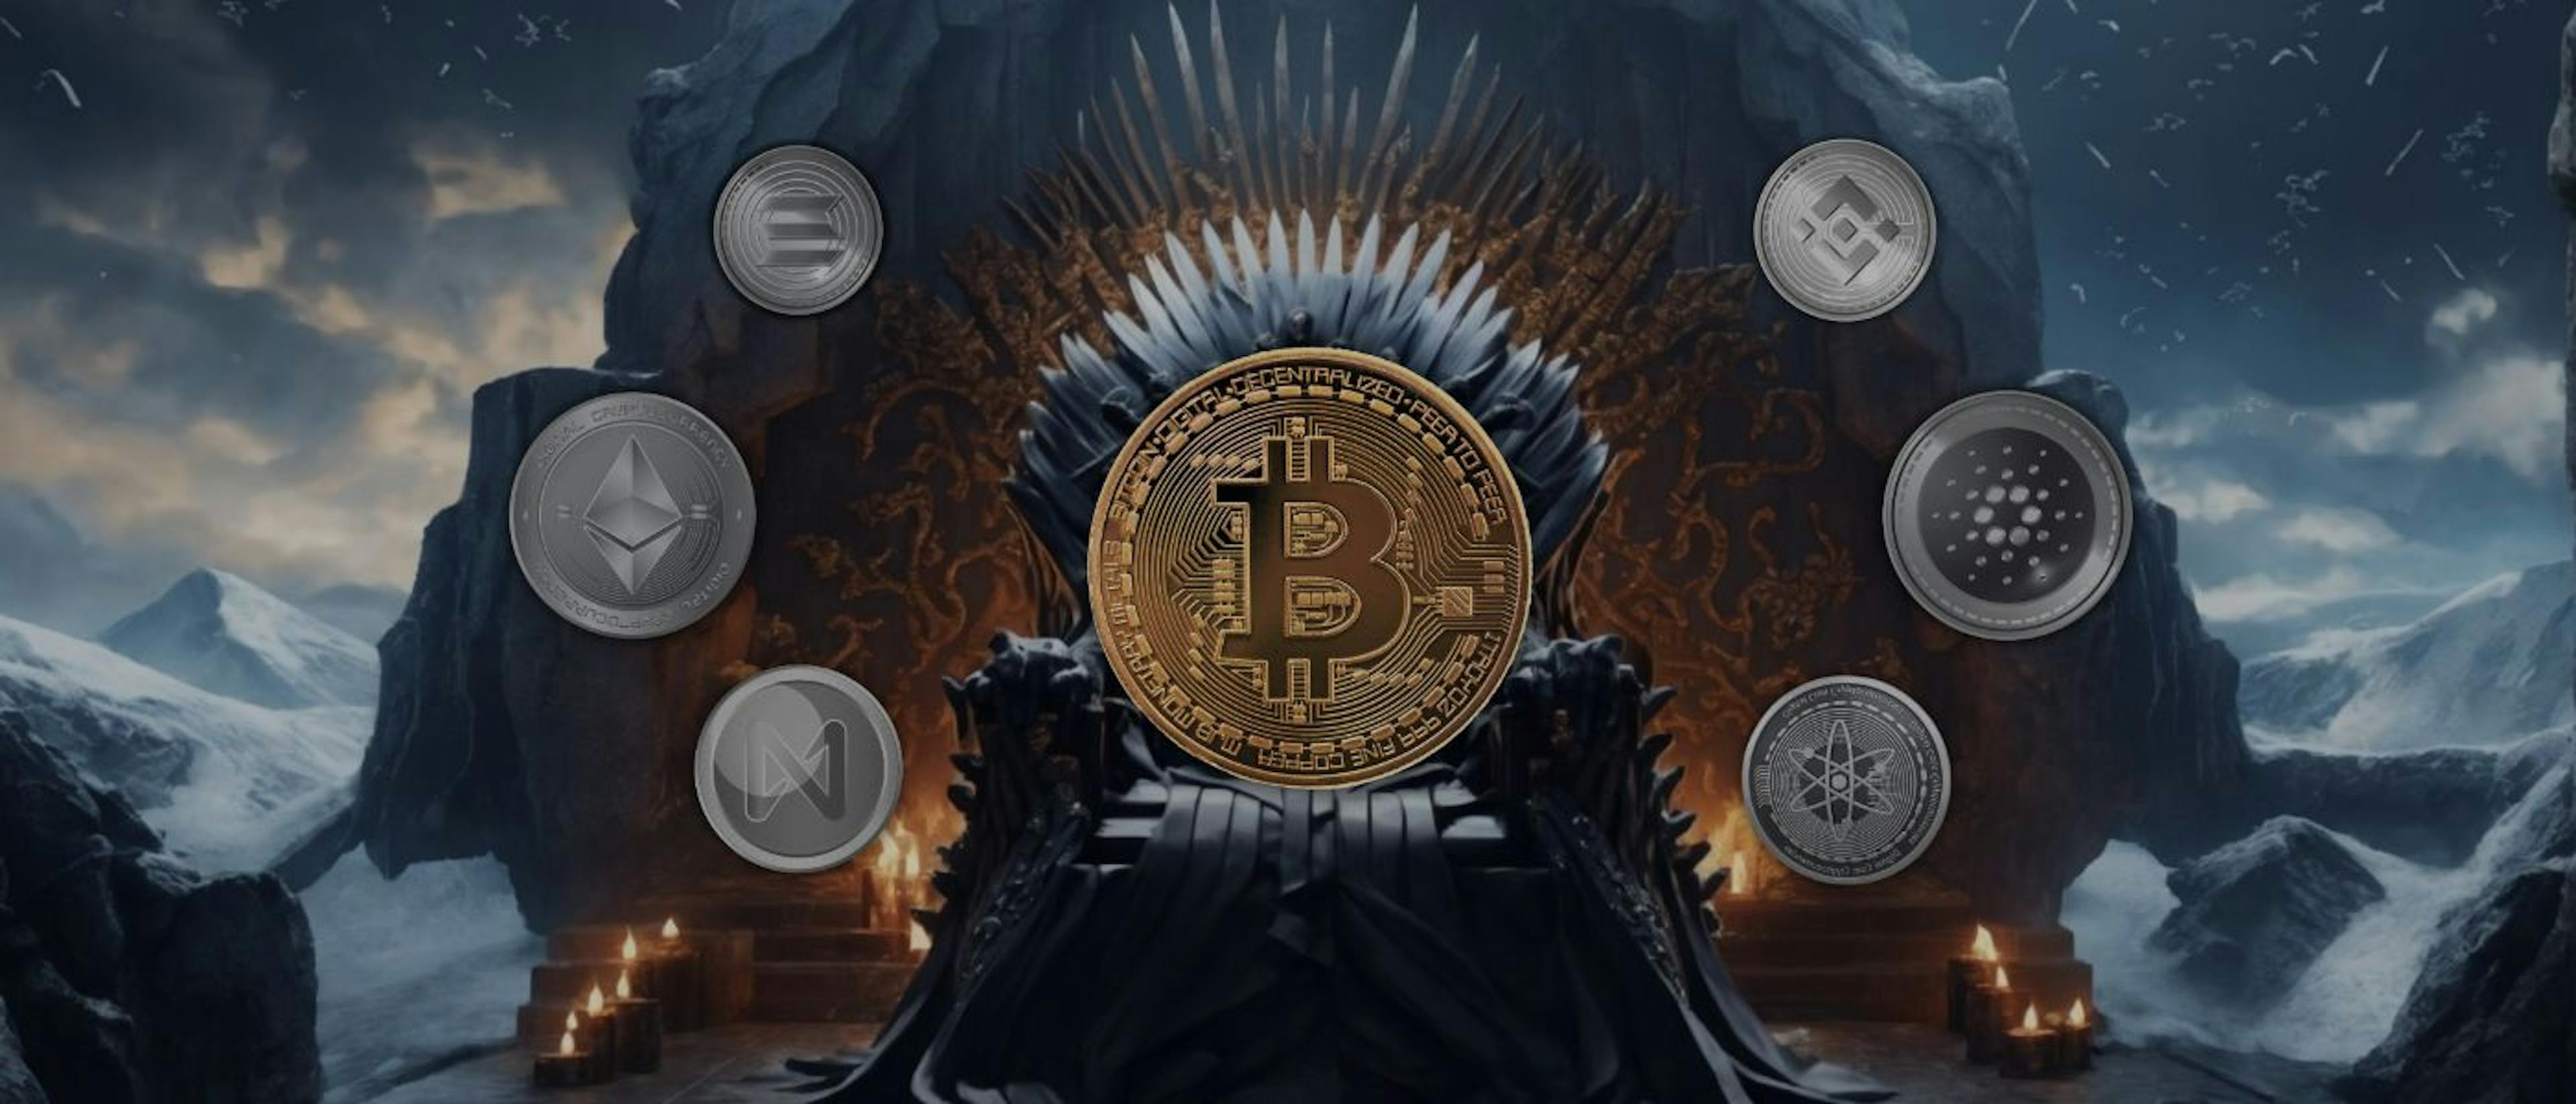 featured image - From 7 Kingdoms to Ledger-Chains: Blockchains as Game of Thrones Houses